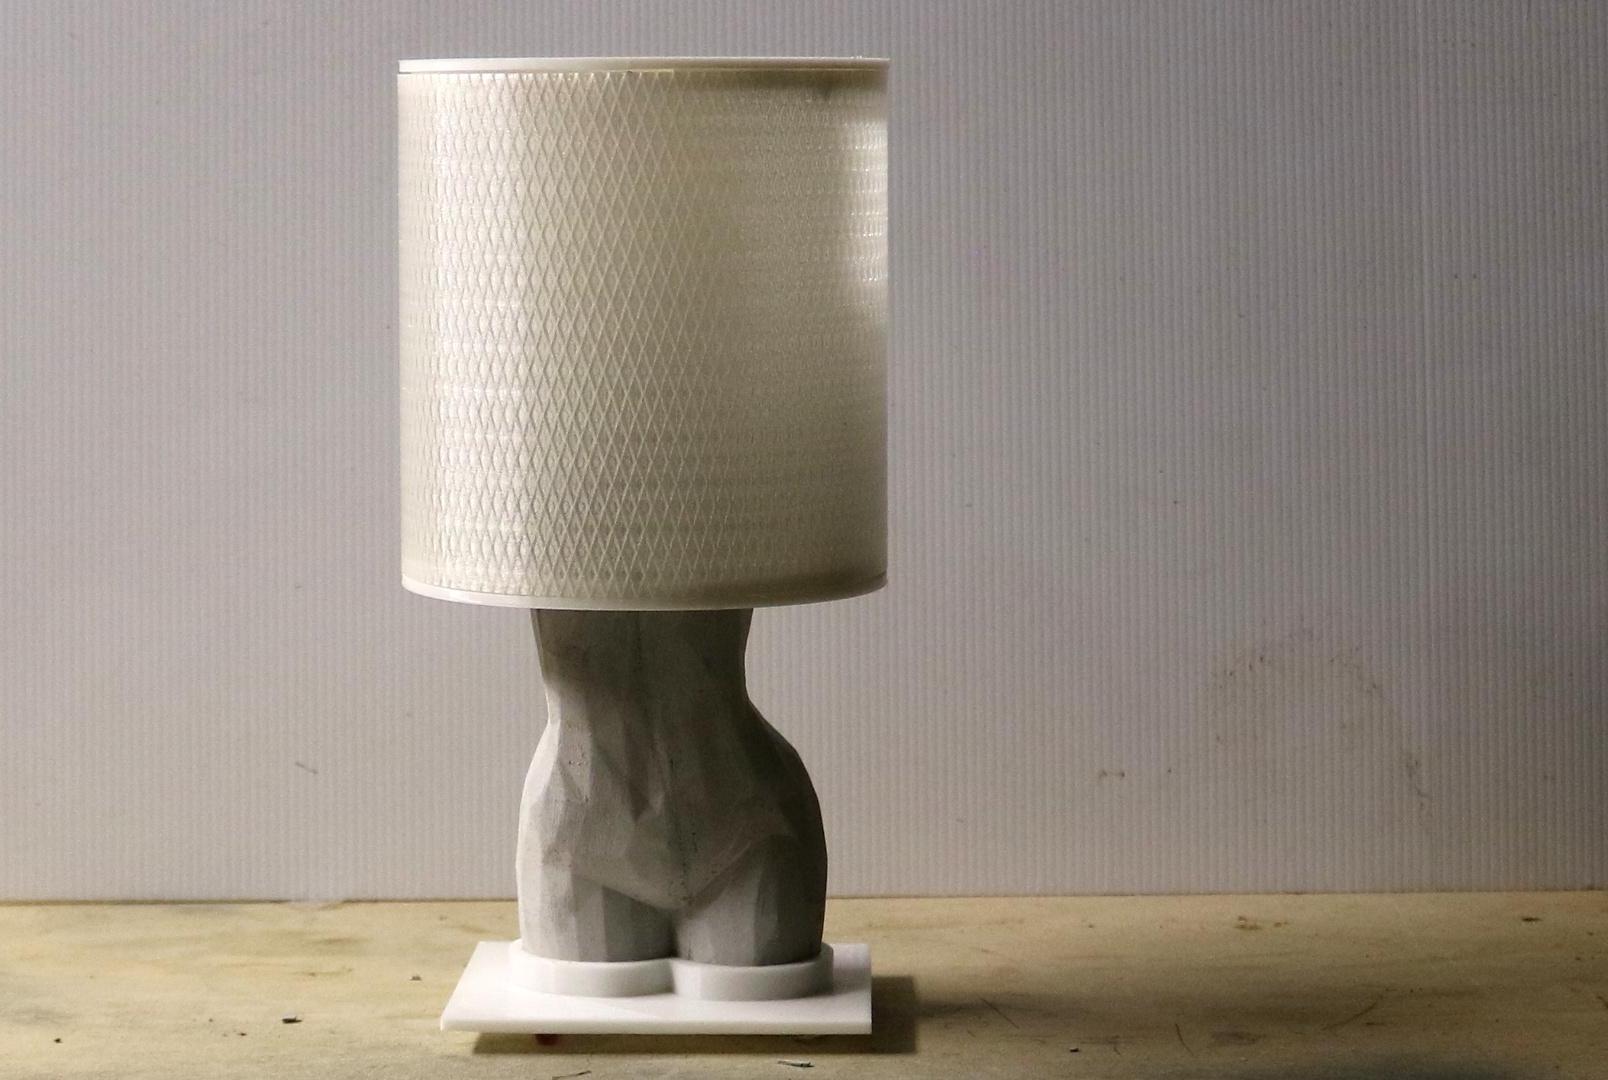 Cement and Neopixel Lamp